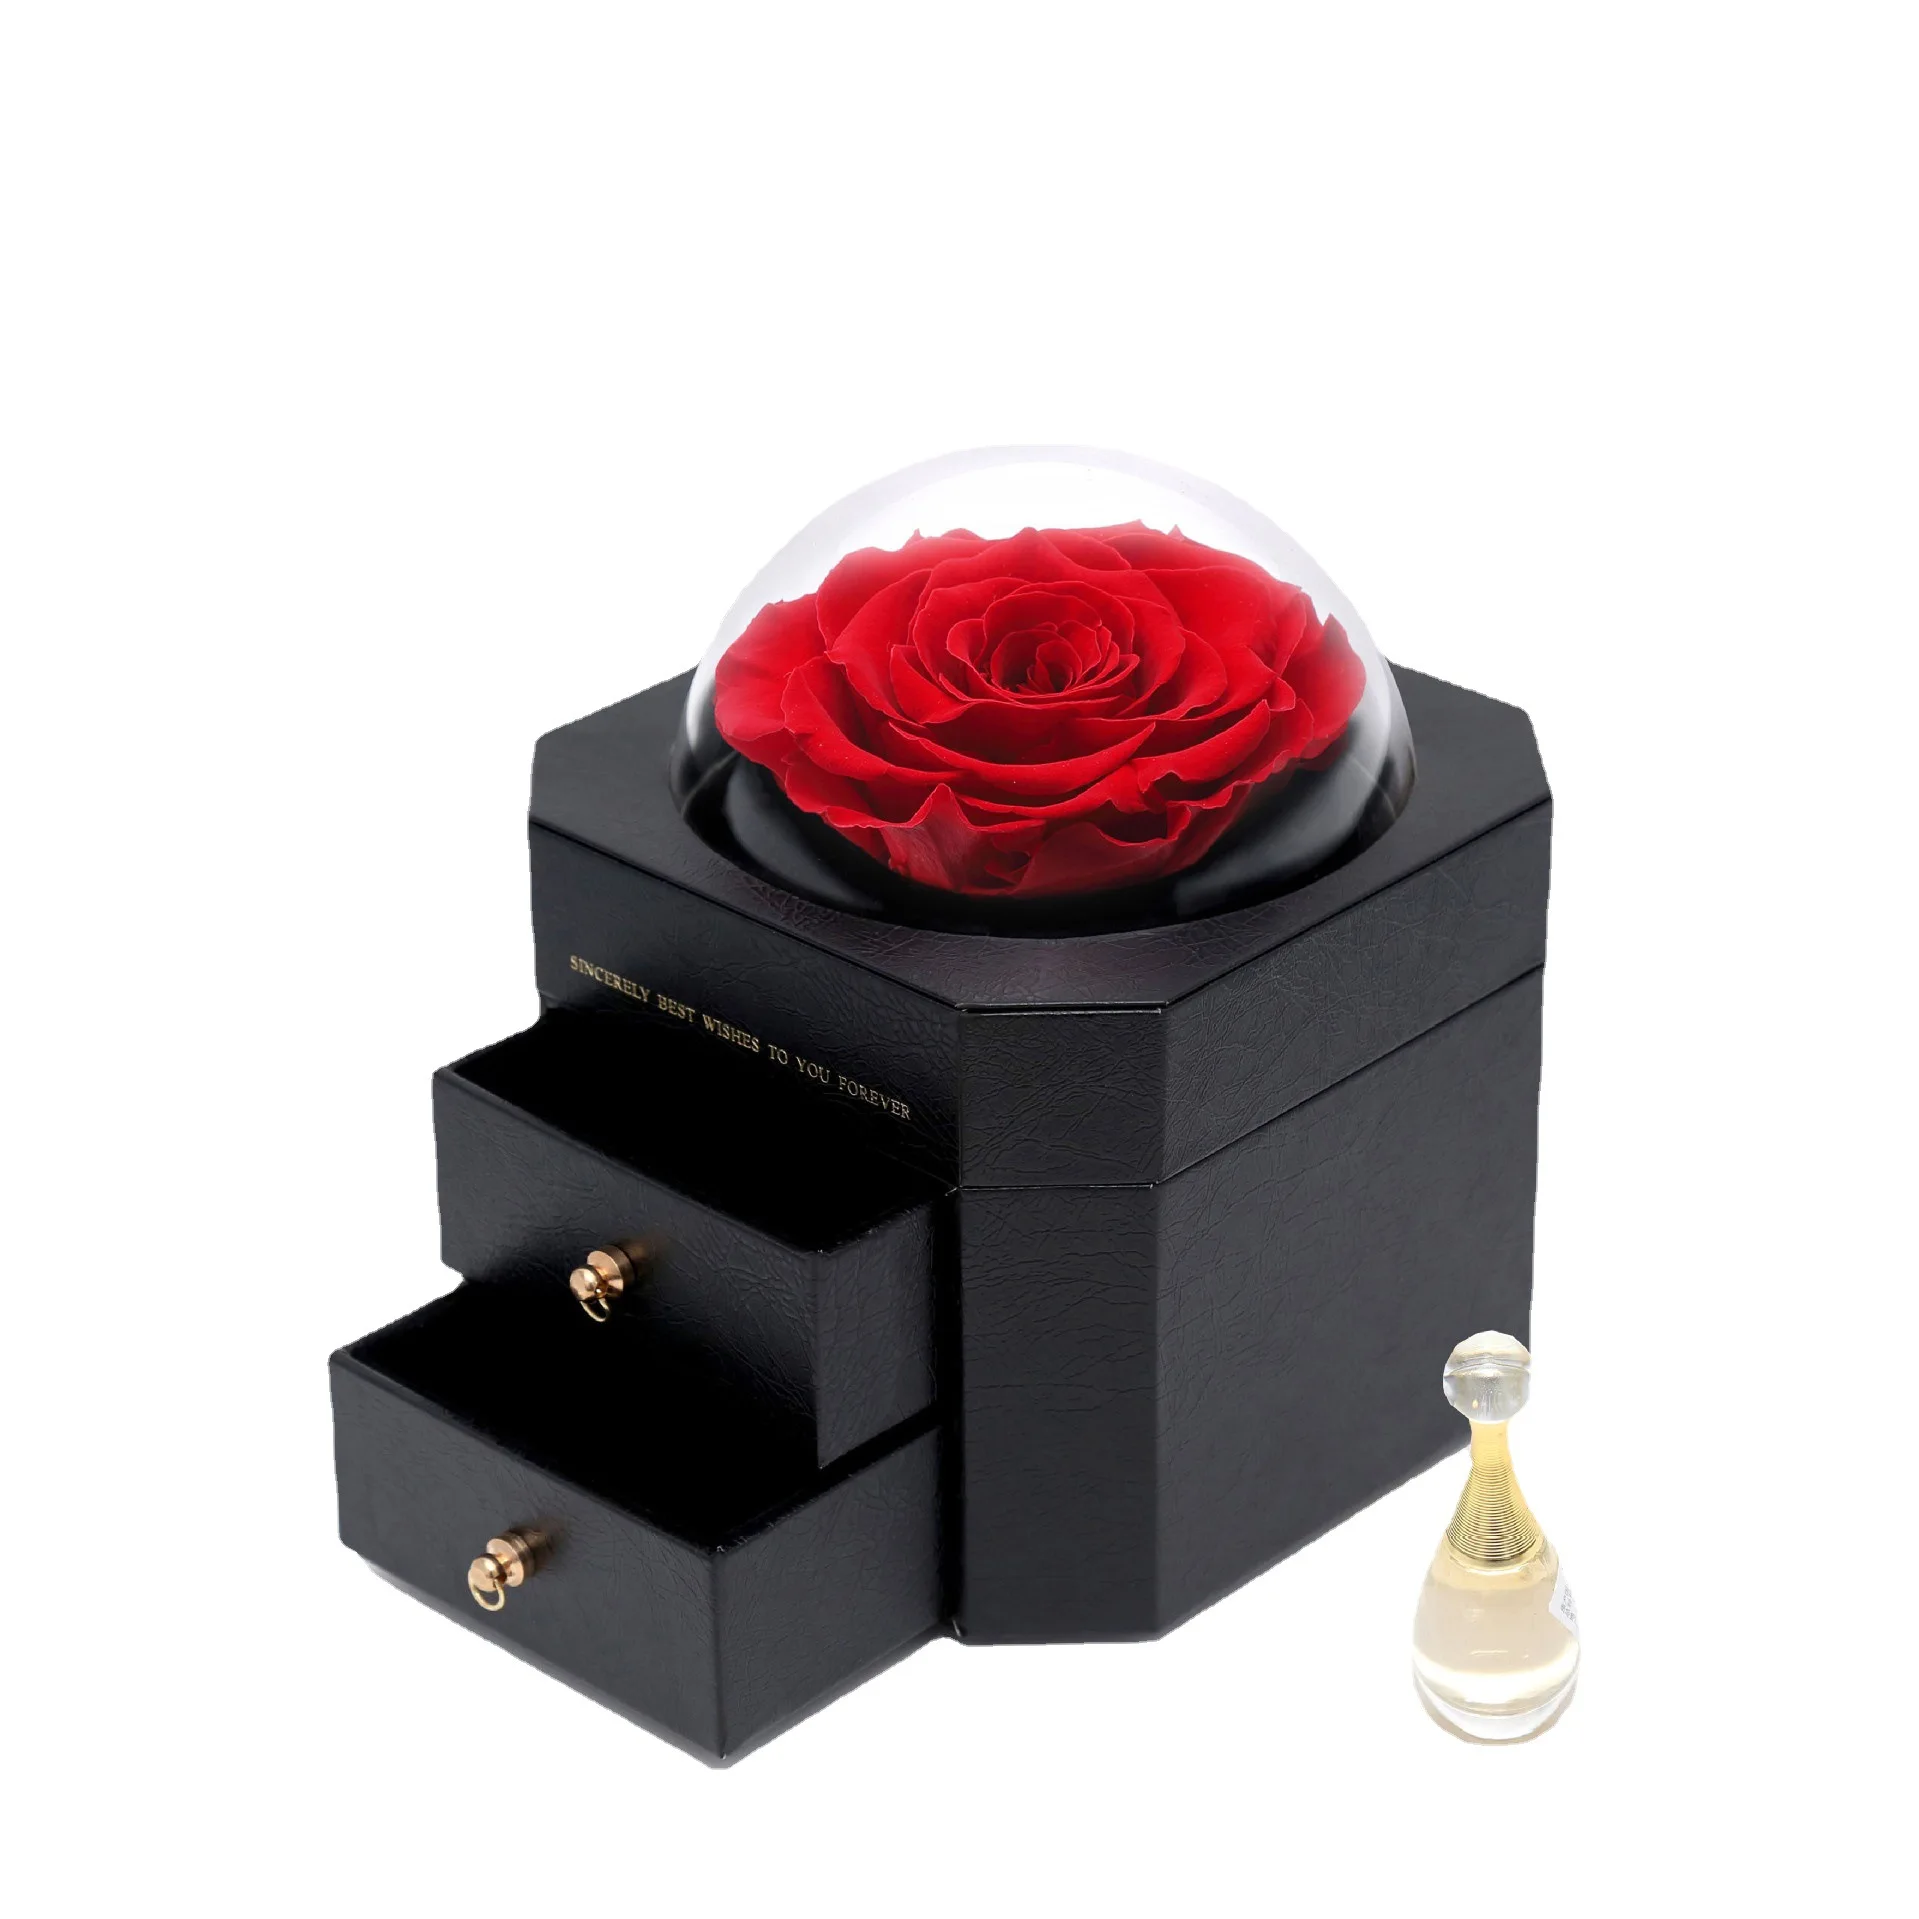 

Simulation Flowers Eternal Flowers Gift Box Creative Gift Dried Roses Glass Cover Box Valentine's Day Gift Send Girlfriend Gift